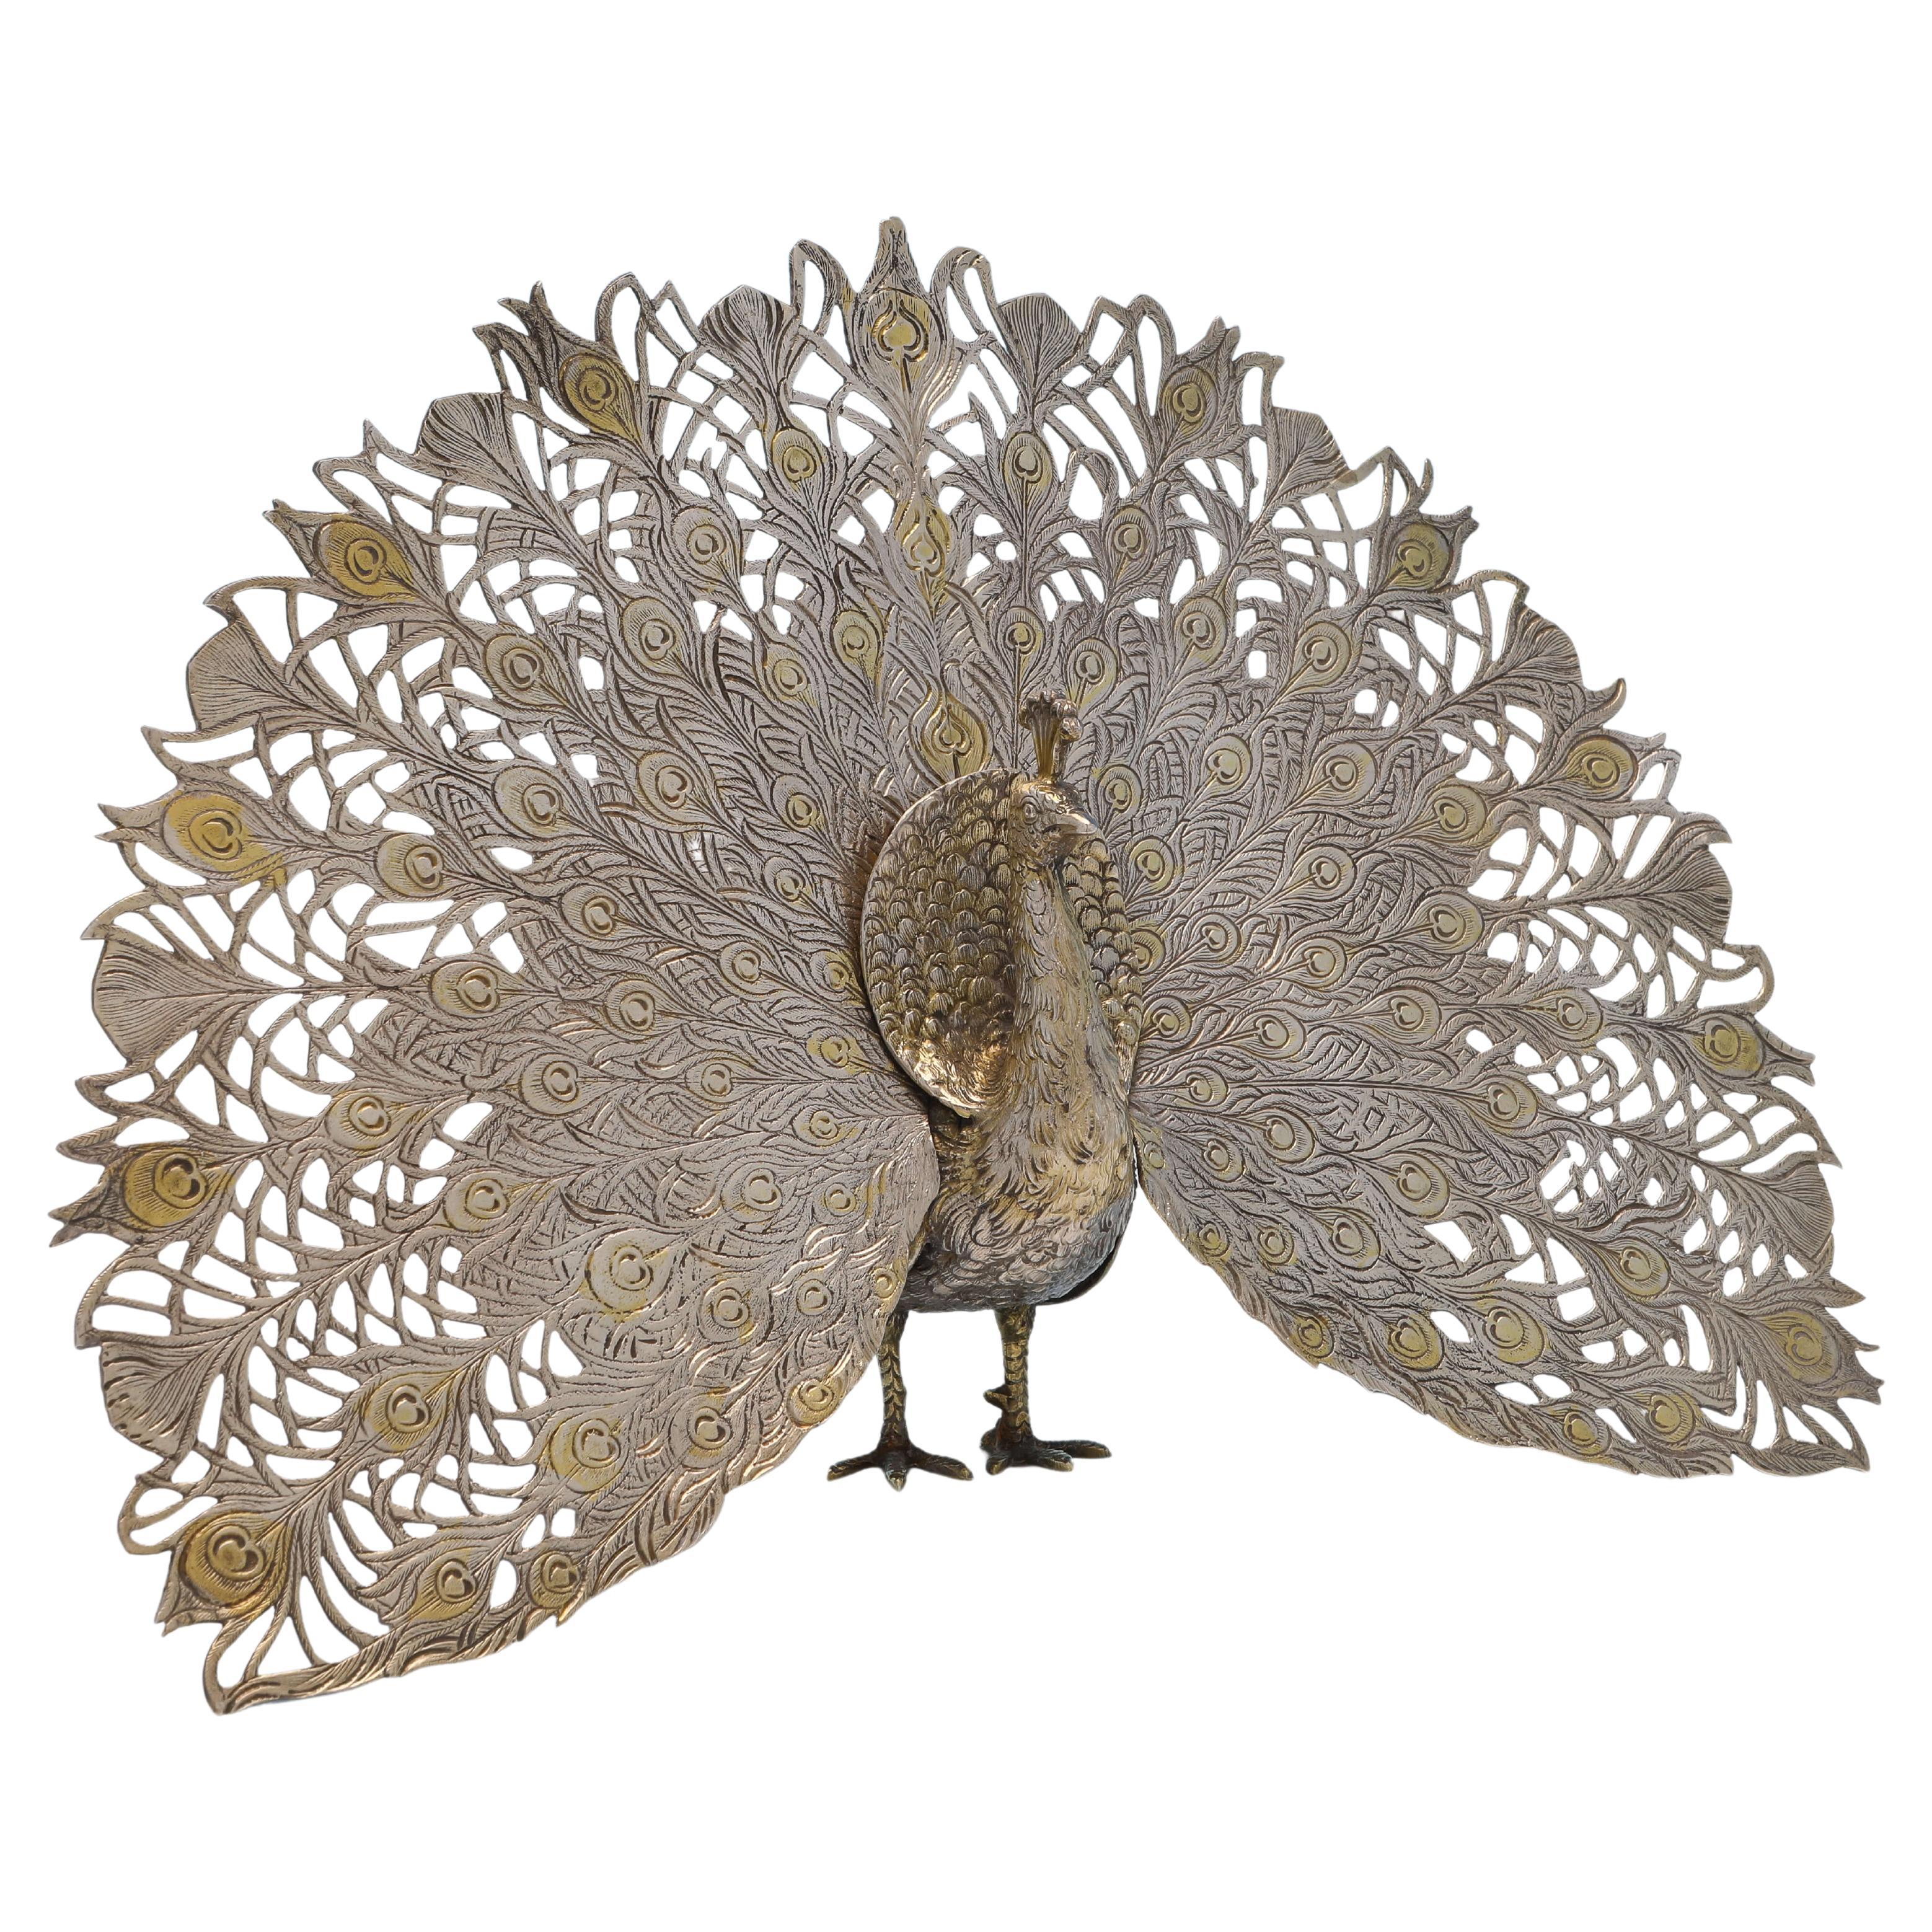 Stunning Gilt & Sterling Silver Model of a Peacock, London 1970